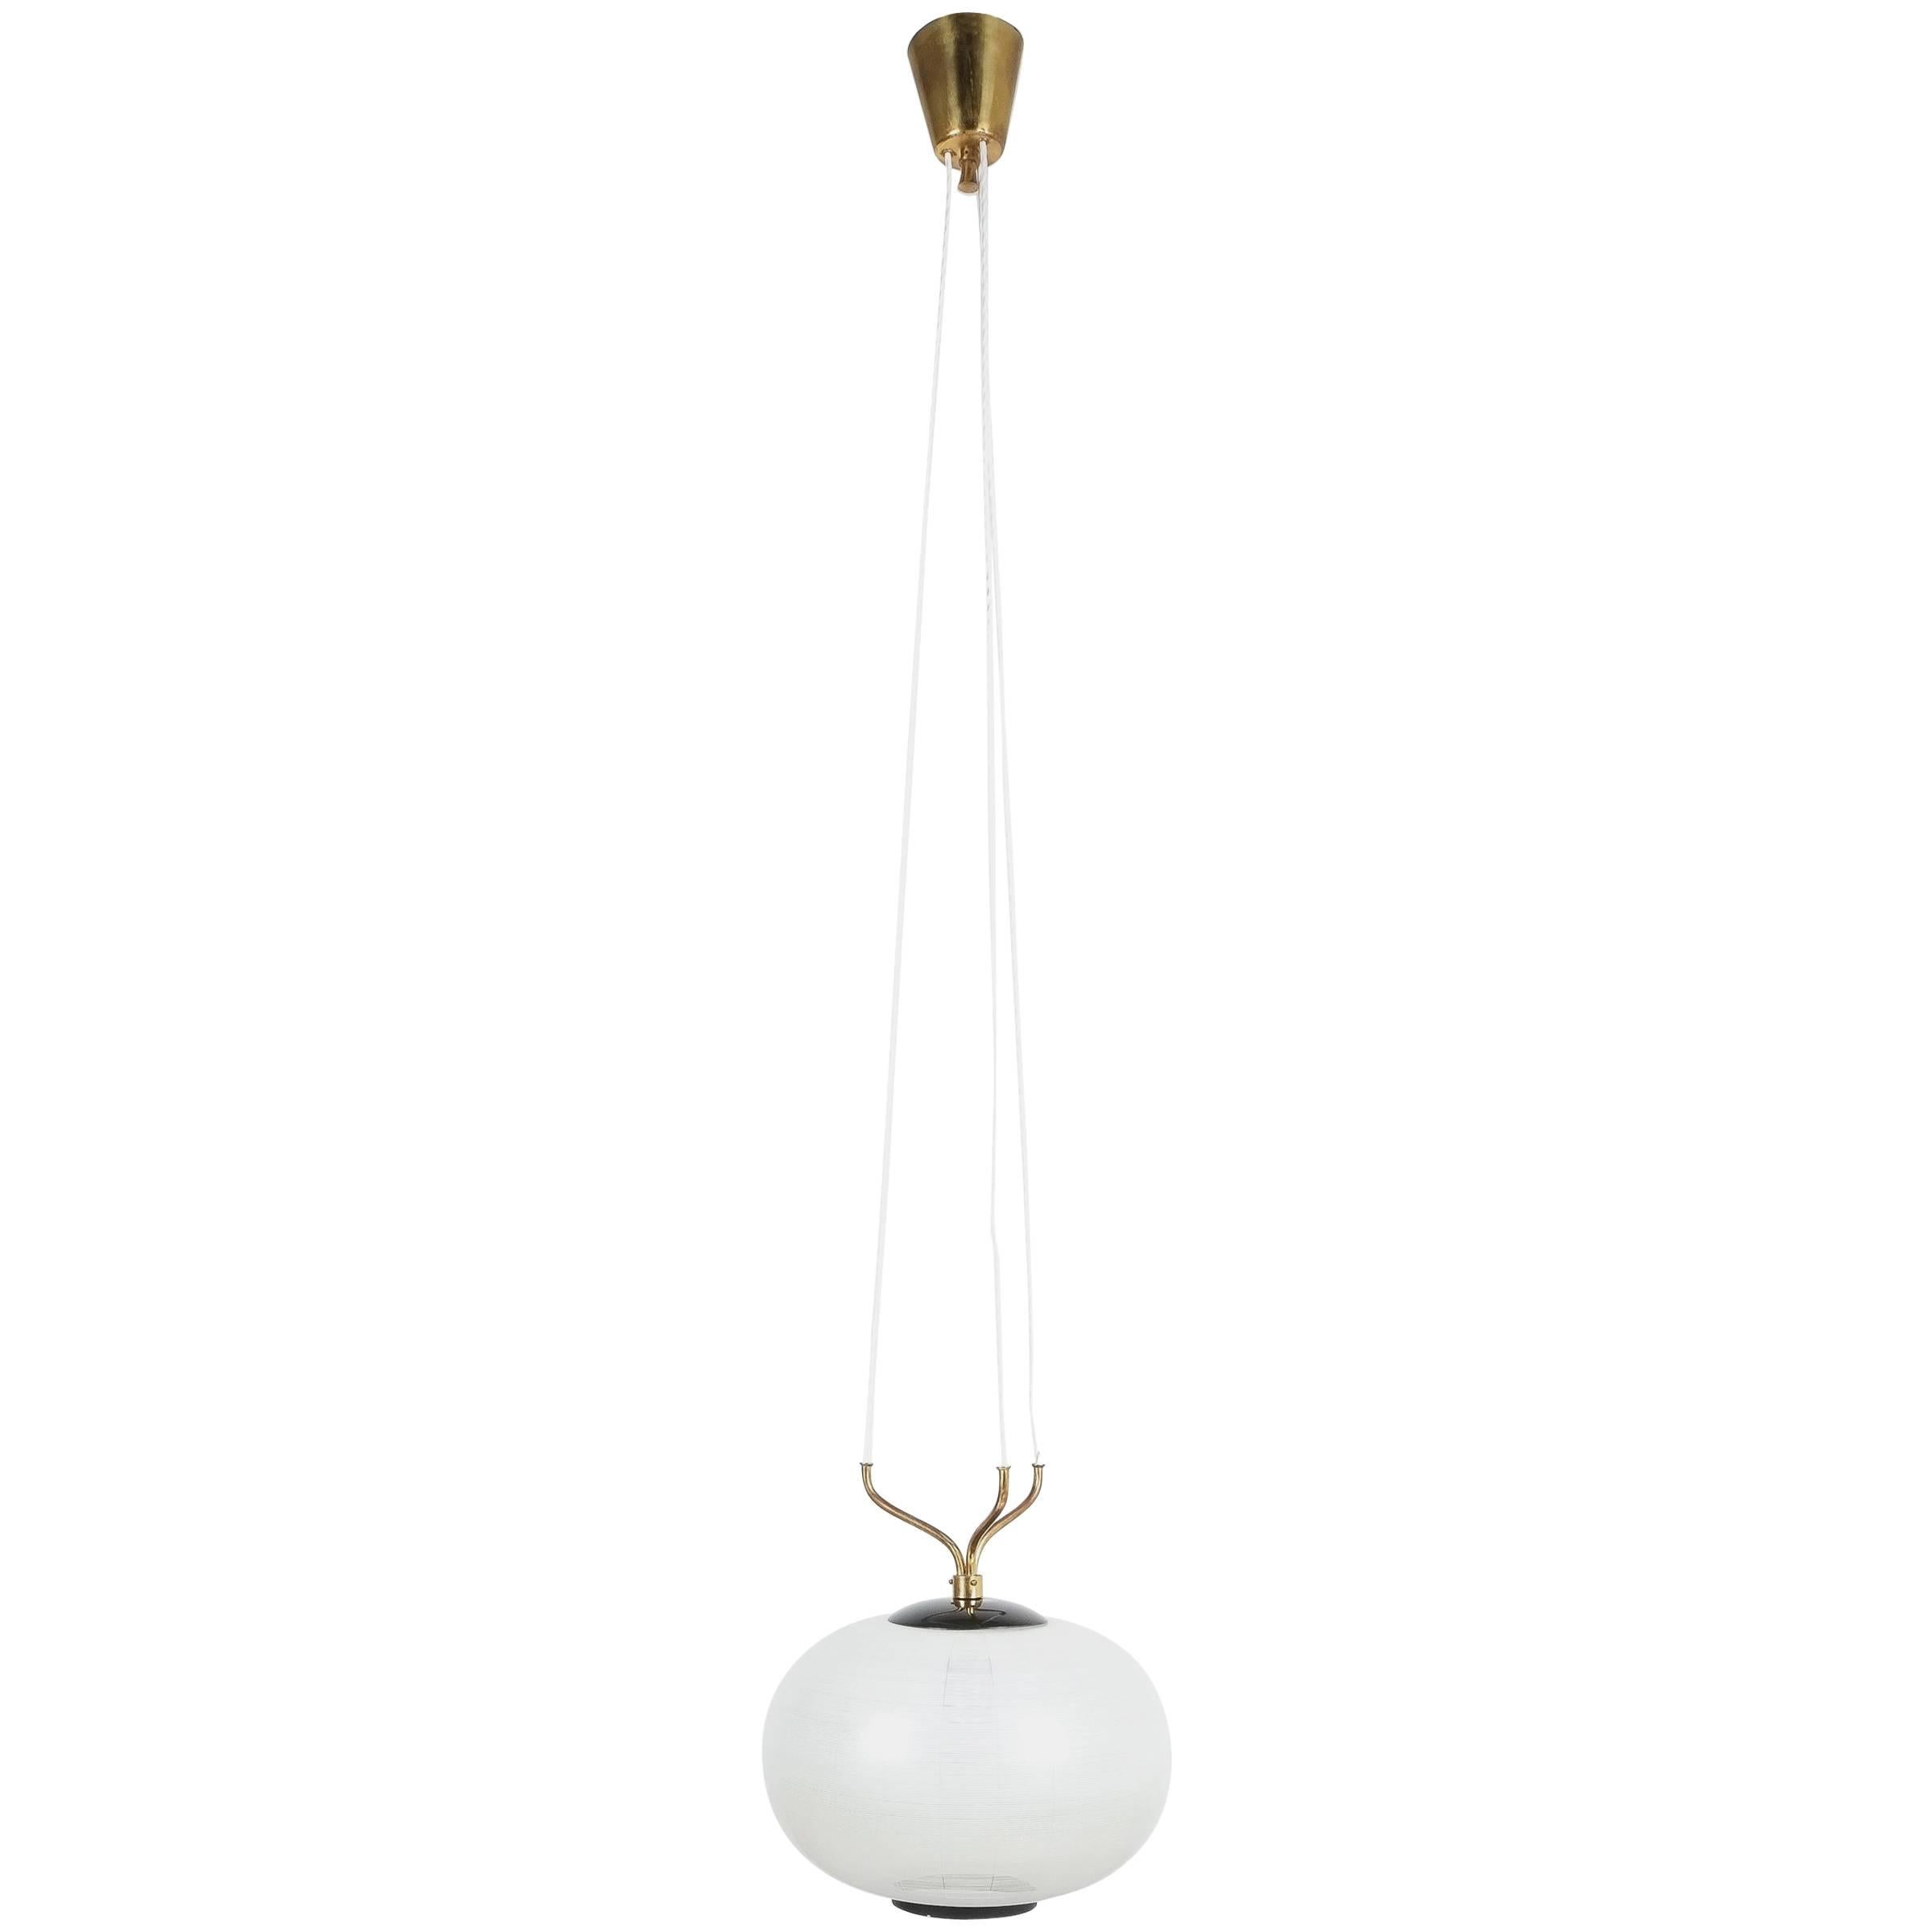 Satin Glass and Brass Suspension Pendant Lamp by Stilnovo, Italy, 1950